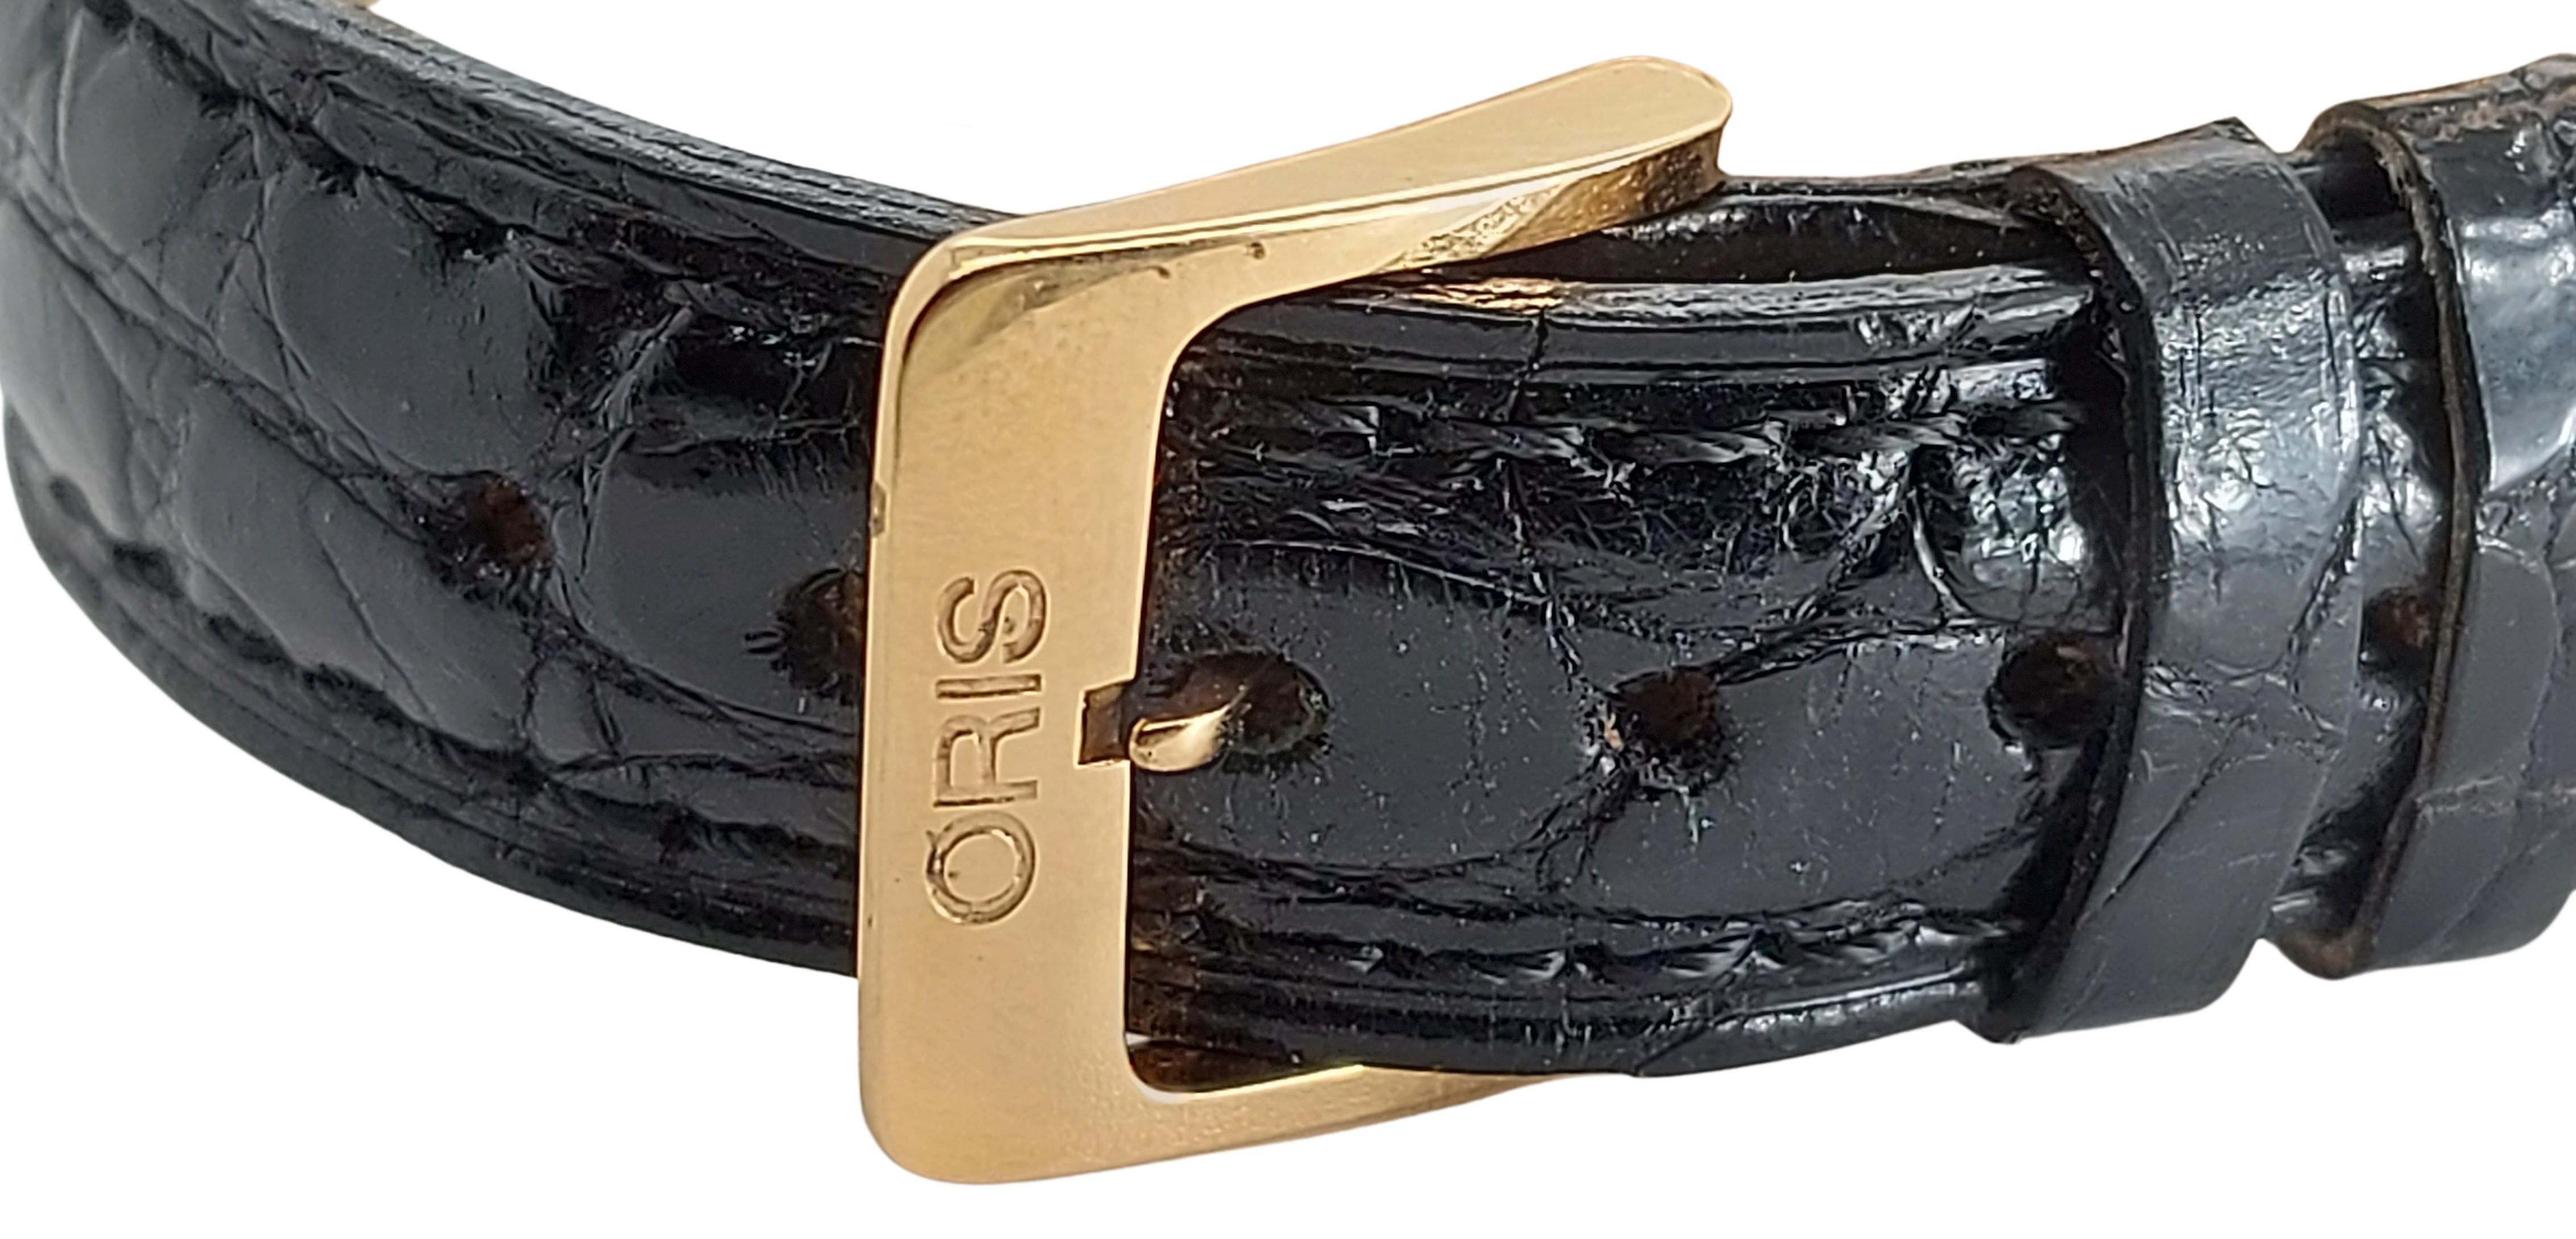 Oris Reveil Limited Edition Mechanical Alarm 18kt Gold, New with Box & Papers en vente 5